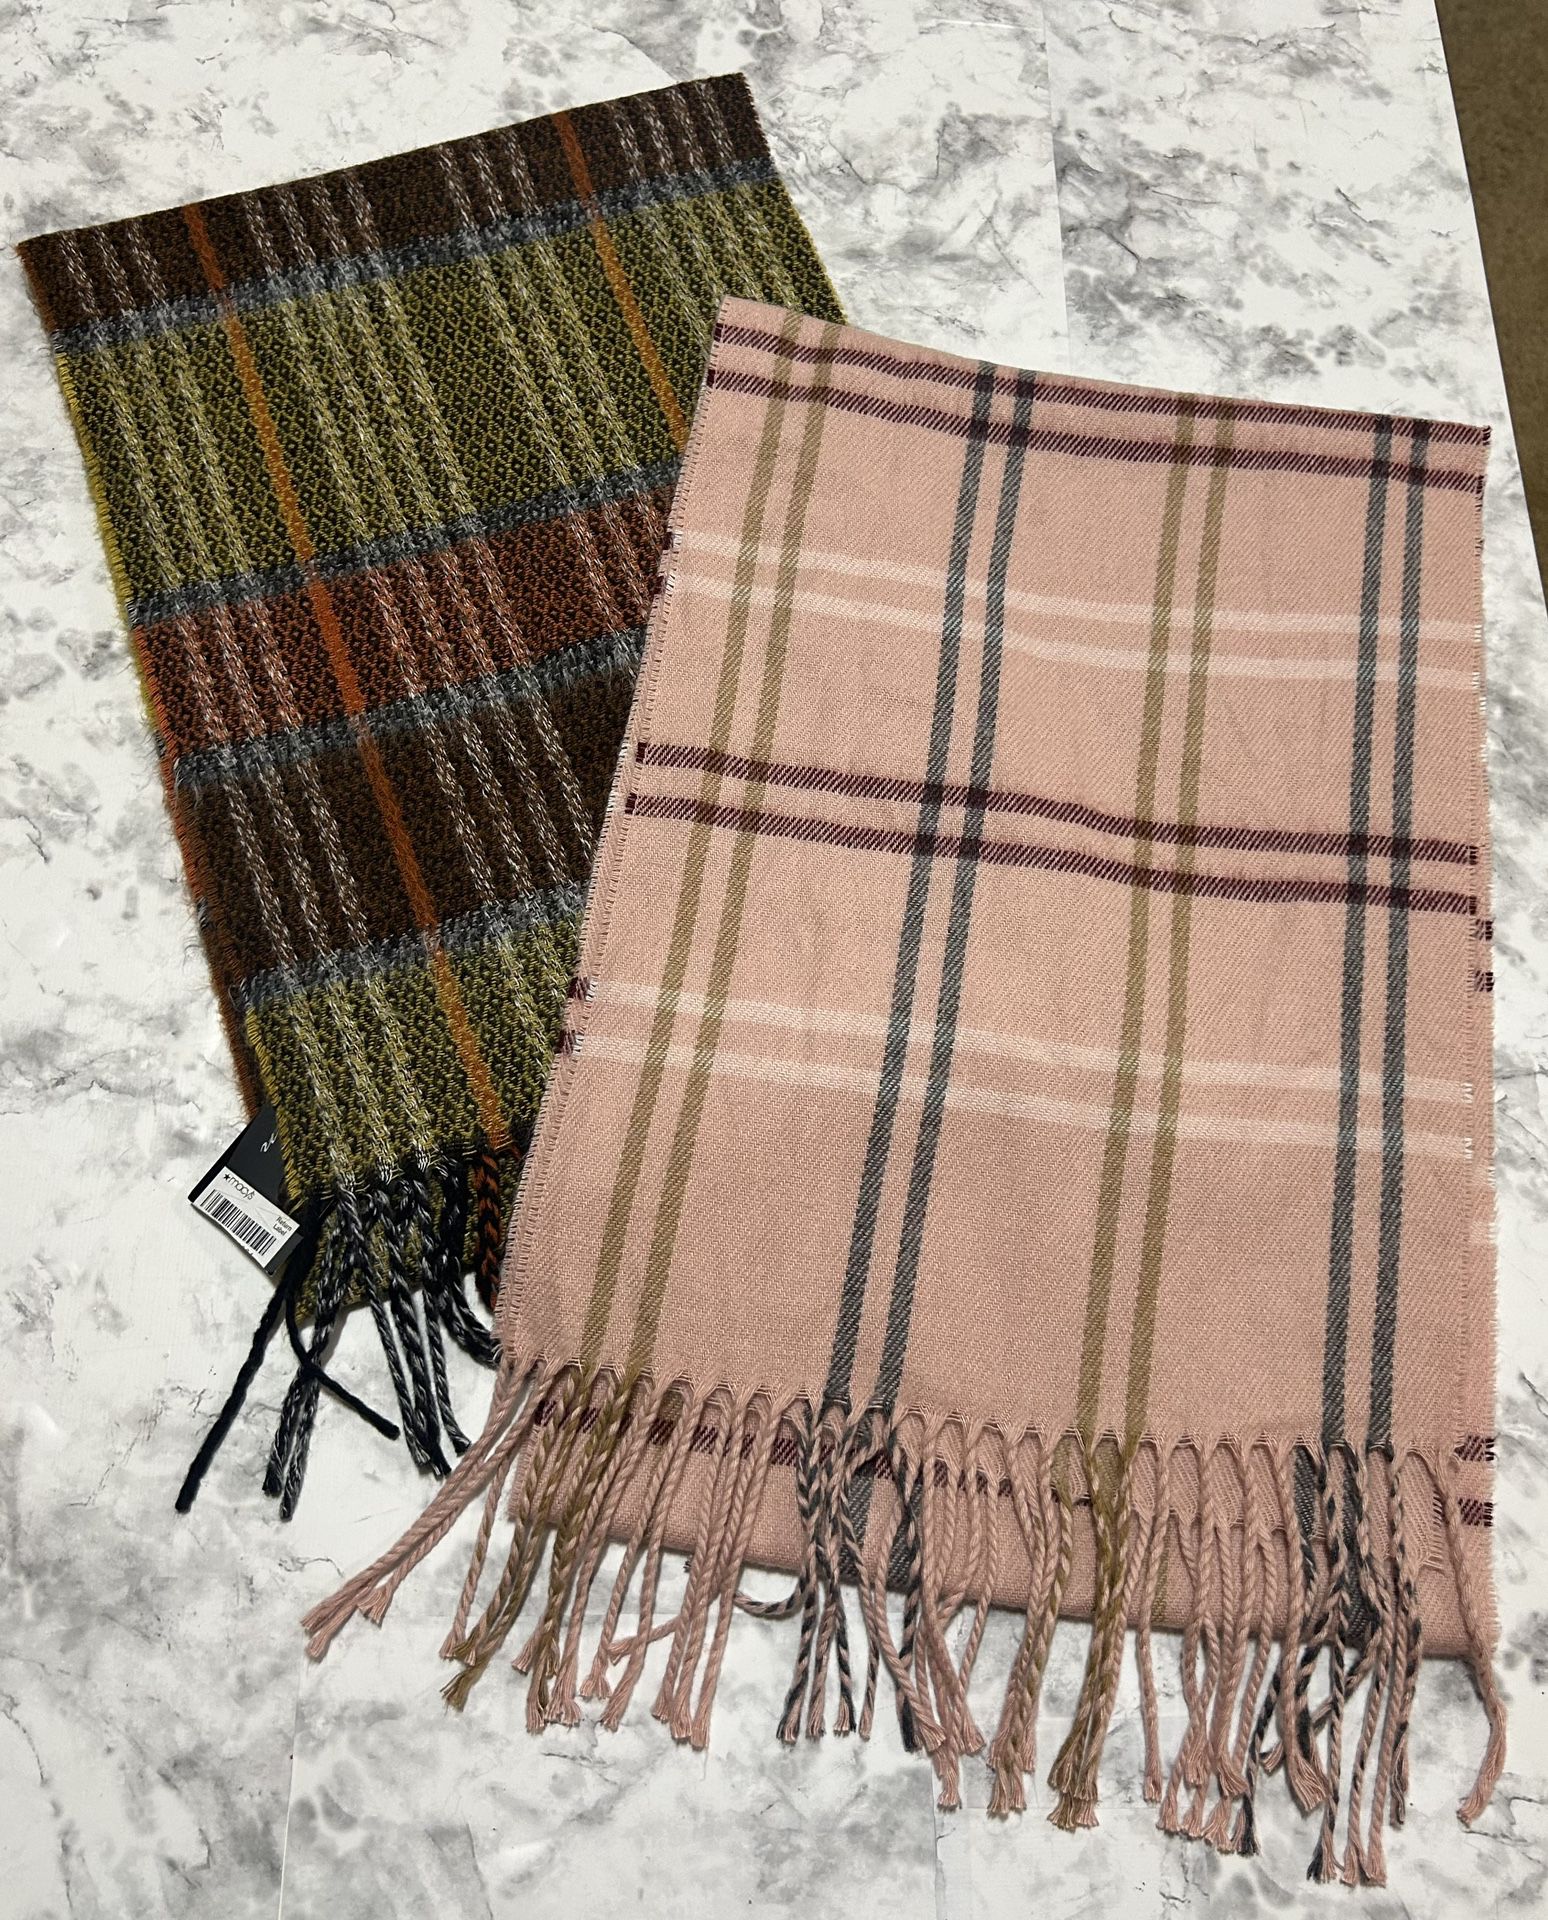 Cejon Made In Italy Plaid Fringe Scarves (2) Acrylic Casual Preppy Lightweight